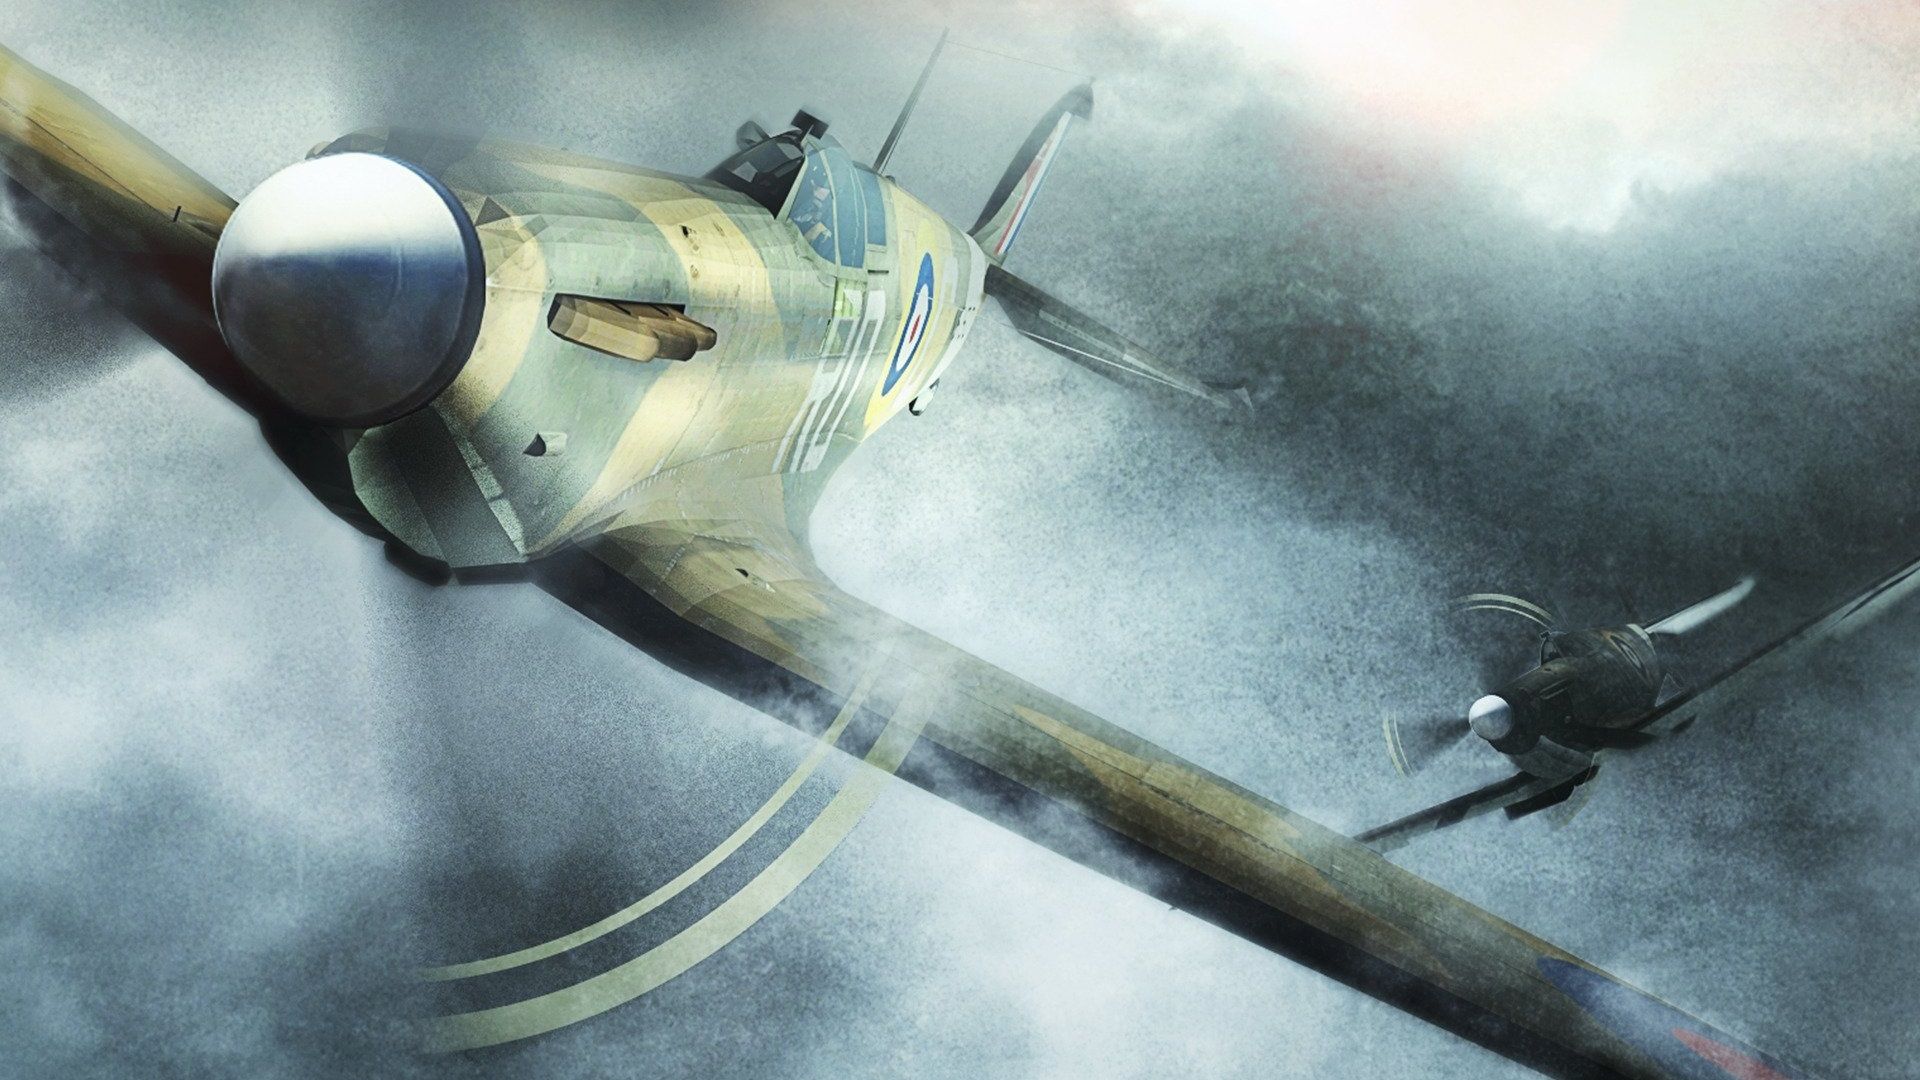 The Battle of Britain background